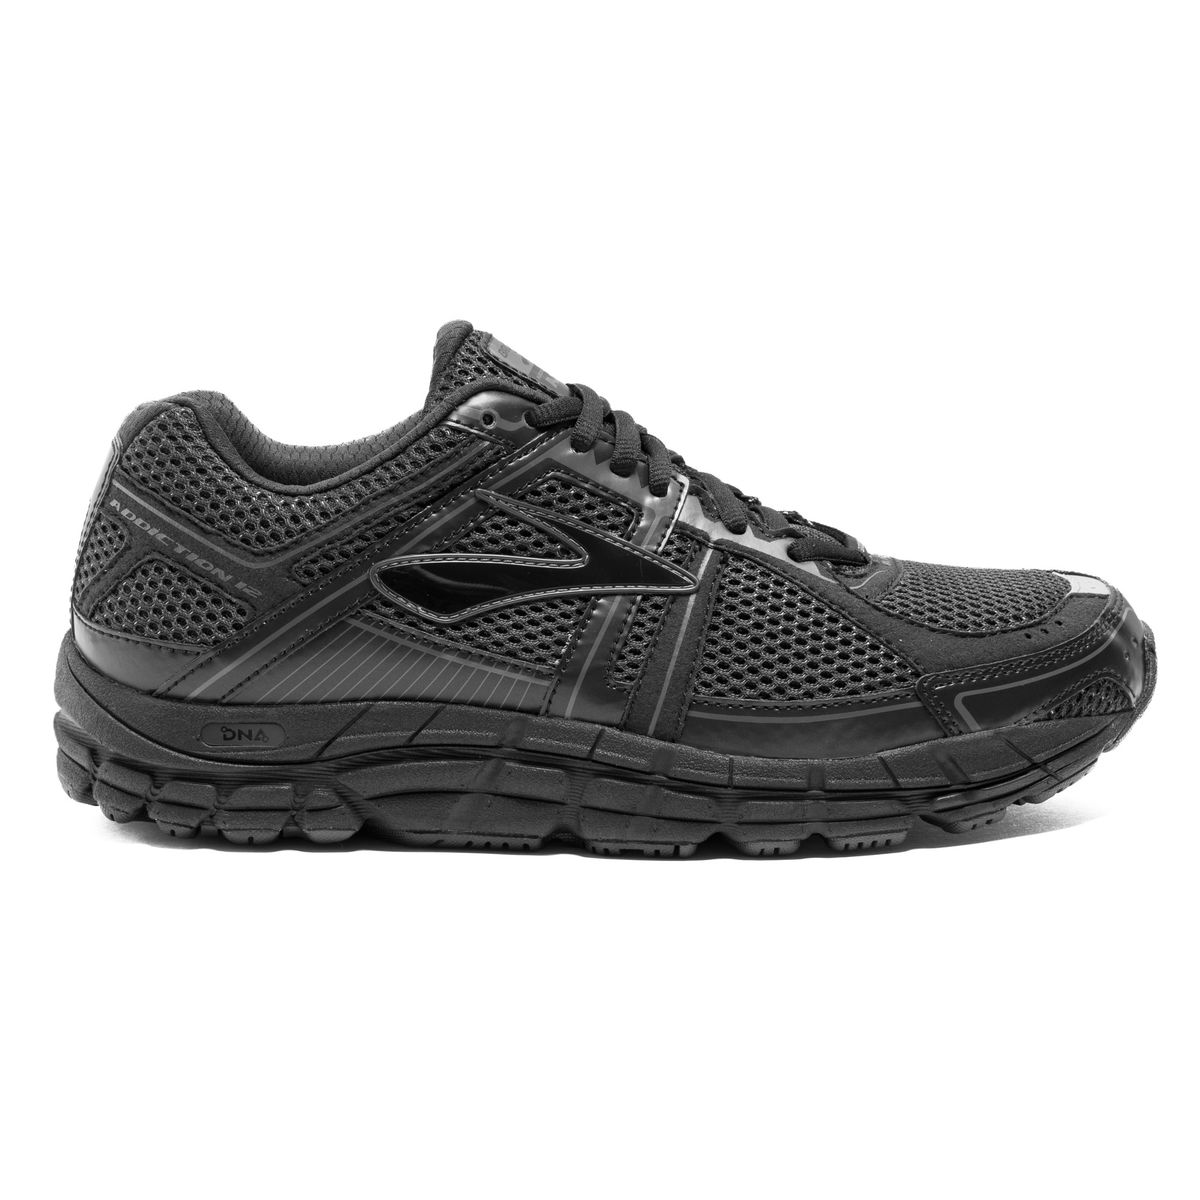 Top 4 Running Shoe Recommendations – Updated 12/2015 | Even Keel ...